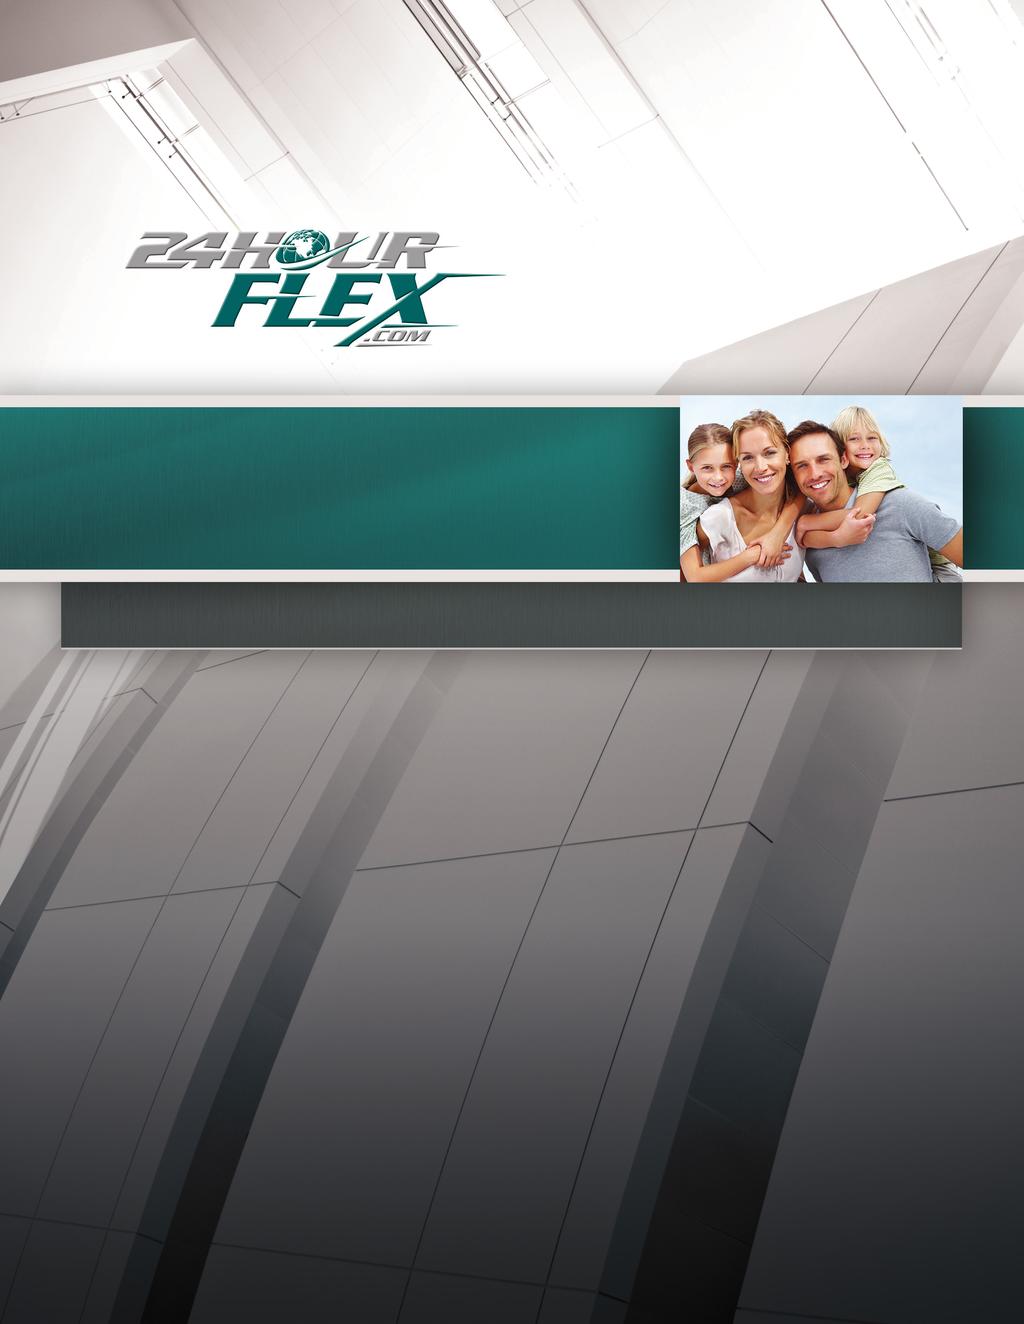 FLEX ENROLLMENT GUIDE WWW.24HOURFLEX.COM SAVE MONEY n EASY ACCESS TO FUNDS n DIRECT DEPOSIT OPTION n ON-LINE ACCESS TO YOUR ACCOUNT n TOLL-FREE FSA HOTLINE n Email: info@24hourflex.